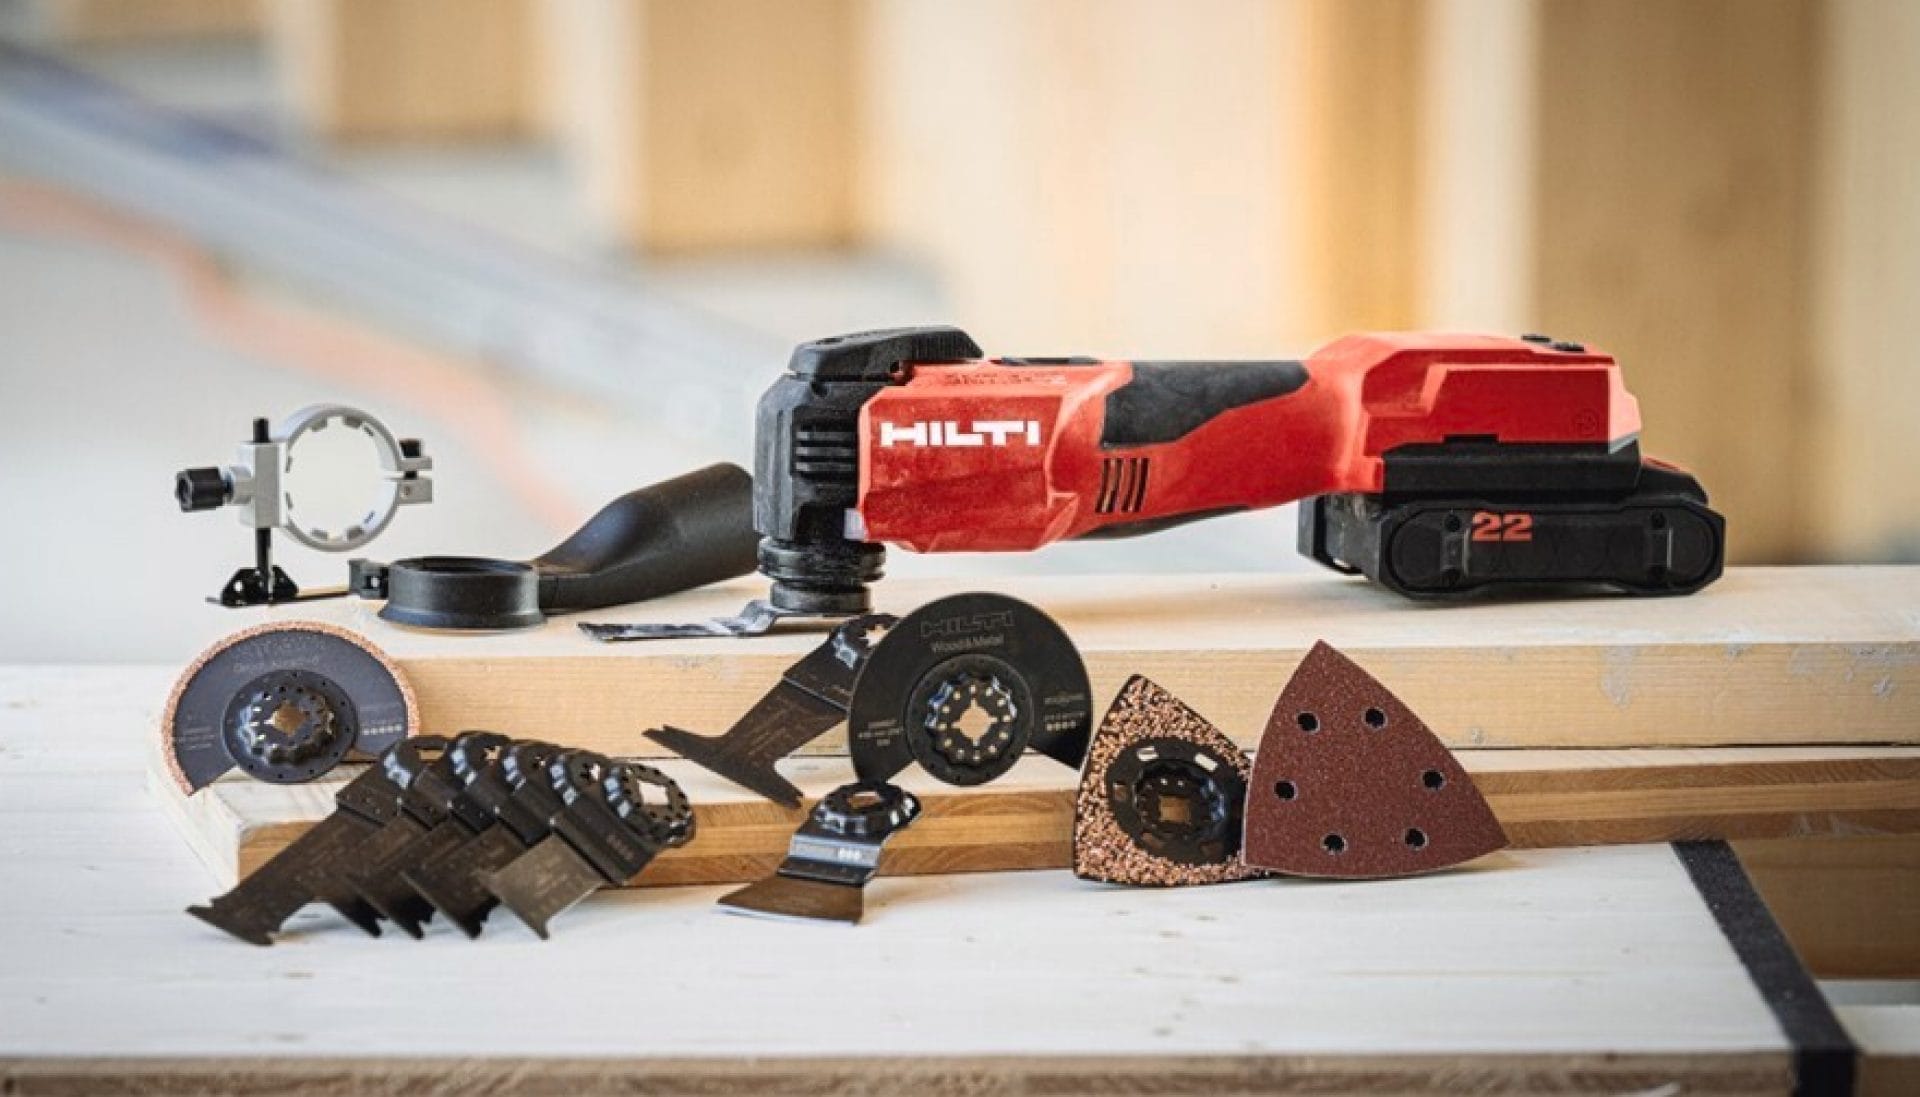 Hilti SMT 6-22 tool displayed with accessories 